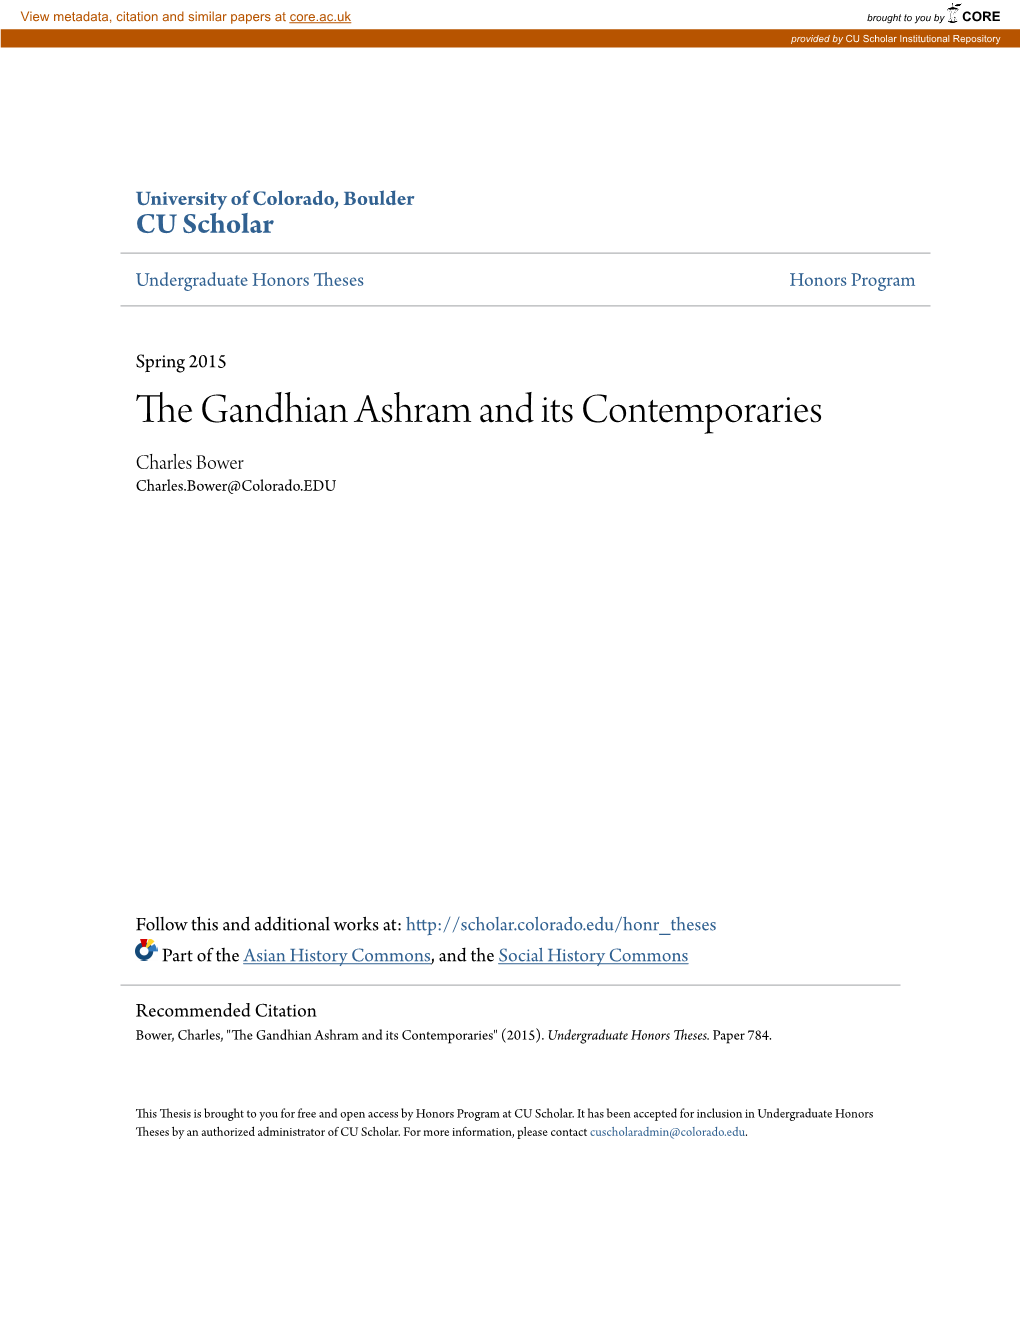 The Gandhian Ashram and Its Contemporaries: a Global Study of the Communal Reaction to Modernity Defense Copy